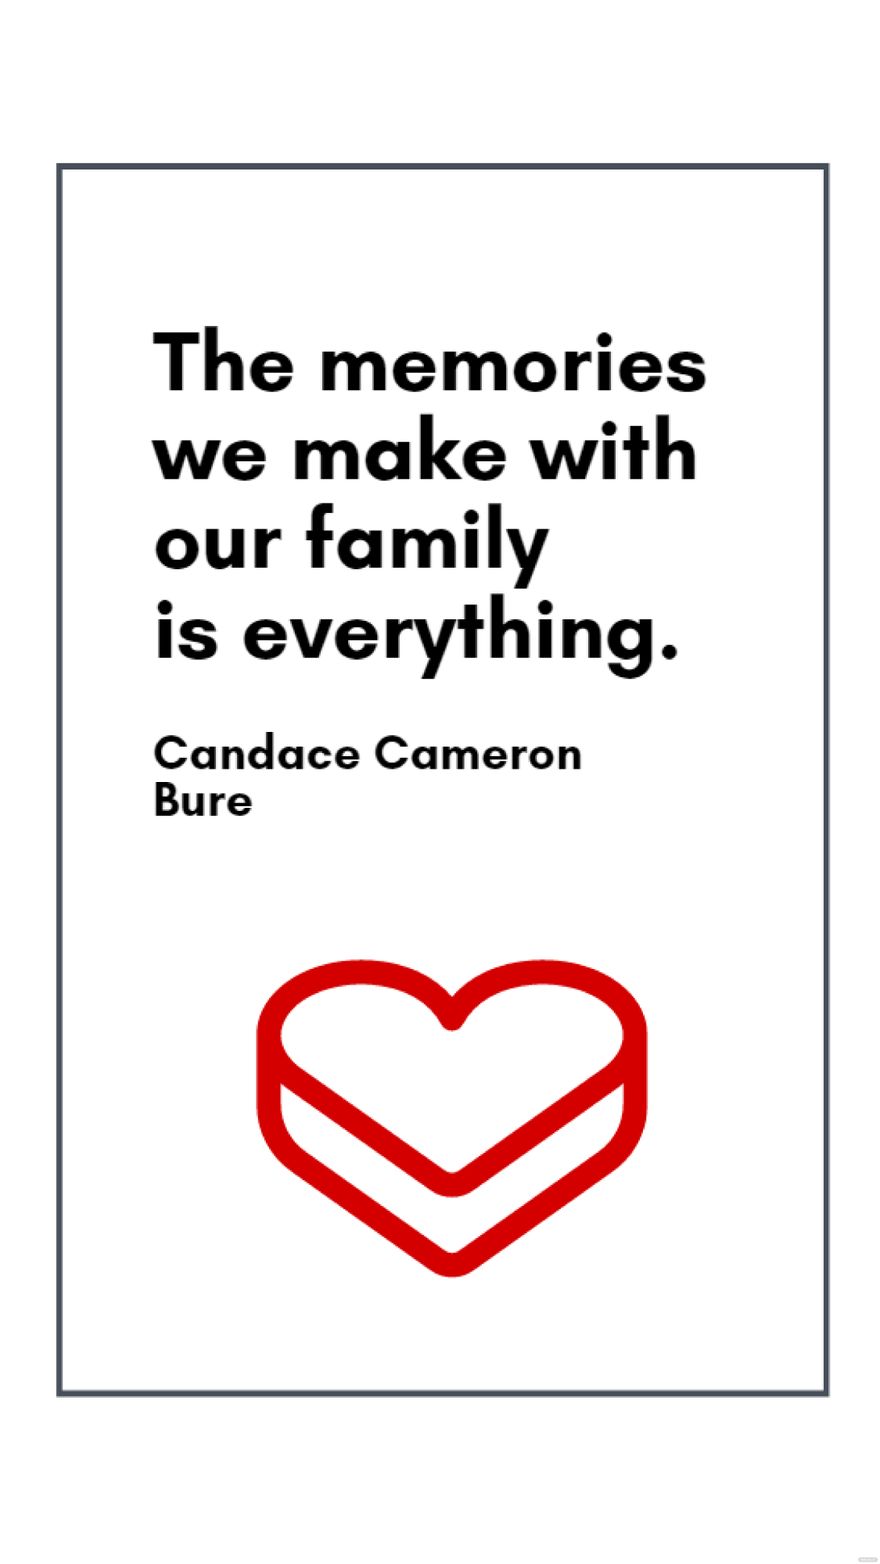 Free Candace Cameron Bure - The memories we make with our family is everything. in JPG